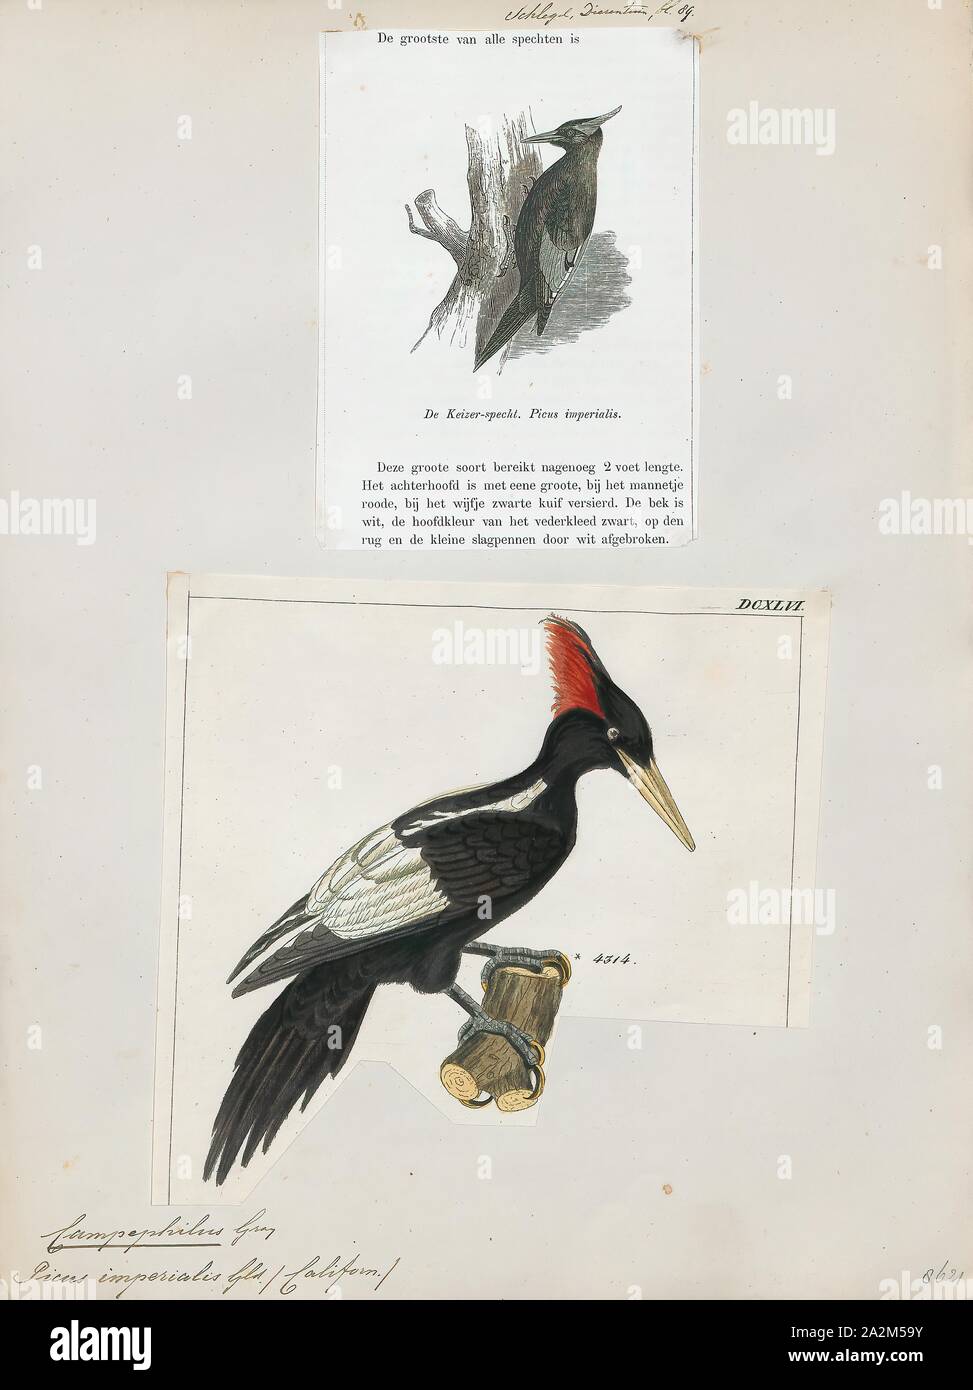 Campephilus imperialis, Print, The imperial woodpecker (Campephilus imperialis) is a species of bird, a member of the woodpecker family Picidae. The genus Campephilus is essentially a tropical one, embracing 13 species, including the imperial woodpecker. If it is not extinct, it is the world's largest woodpecker species, at 56–60 cm (22–23.5 in) long. Researchers have discovered that the imperial woodpecker has slow climbing strides and a fast wing-flap rate compared with other woodpeckers. Owing to its close taxonomic relationship, and its similarity in appearance, to the ivory-billed Stock Photo